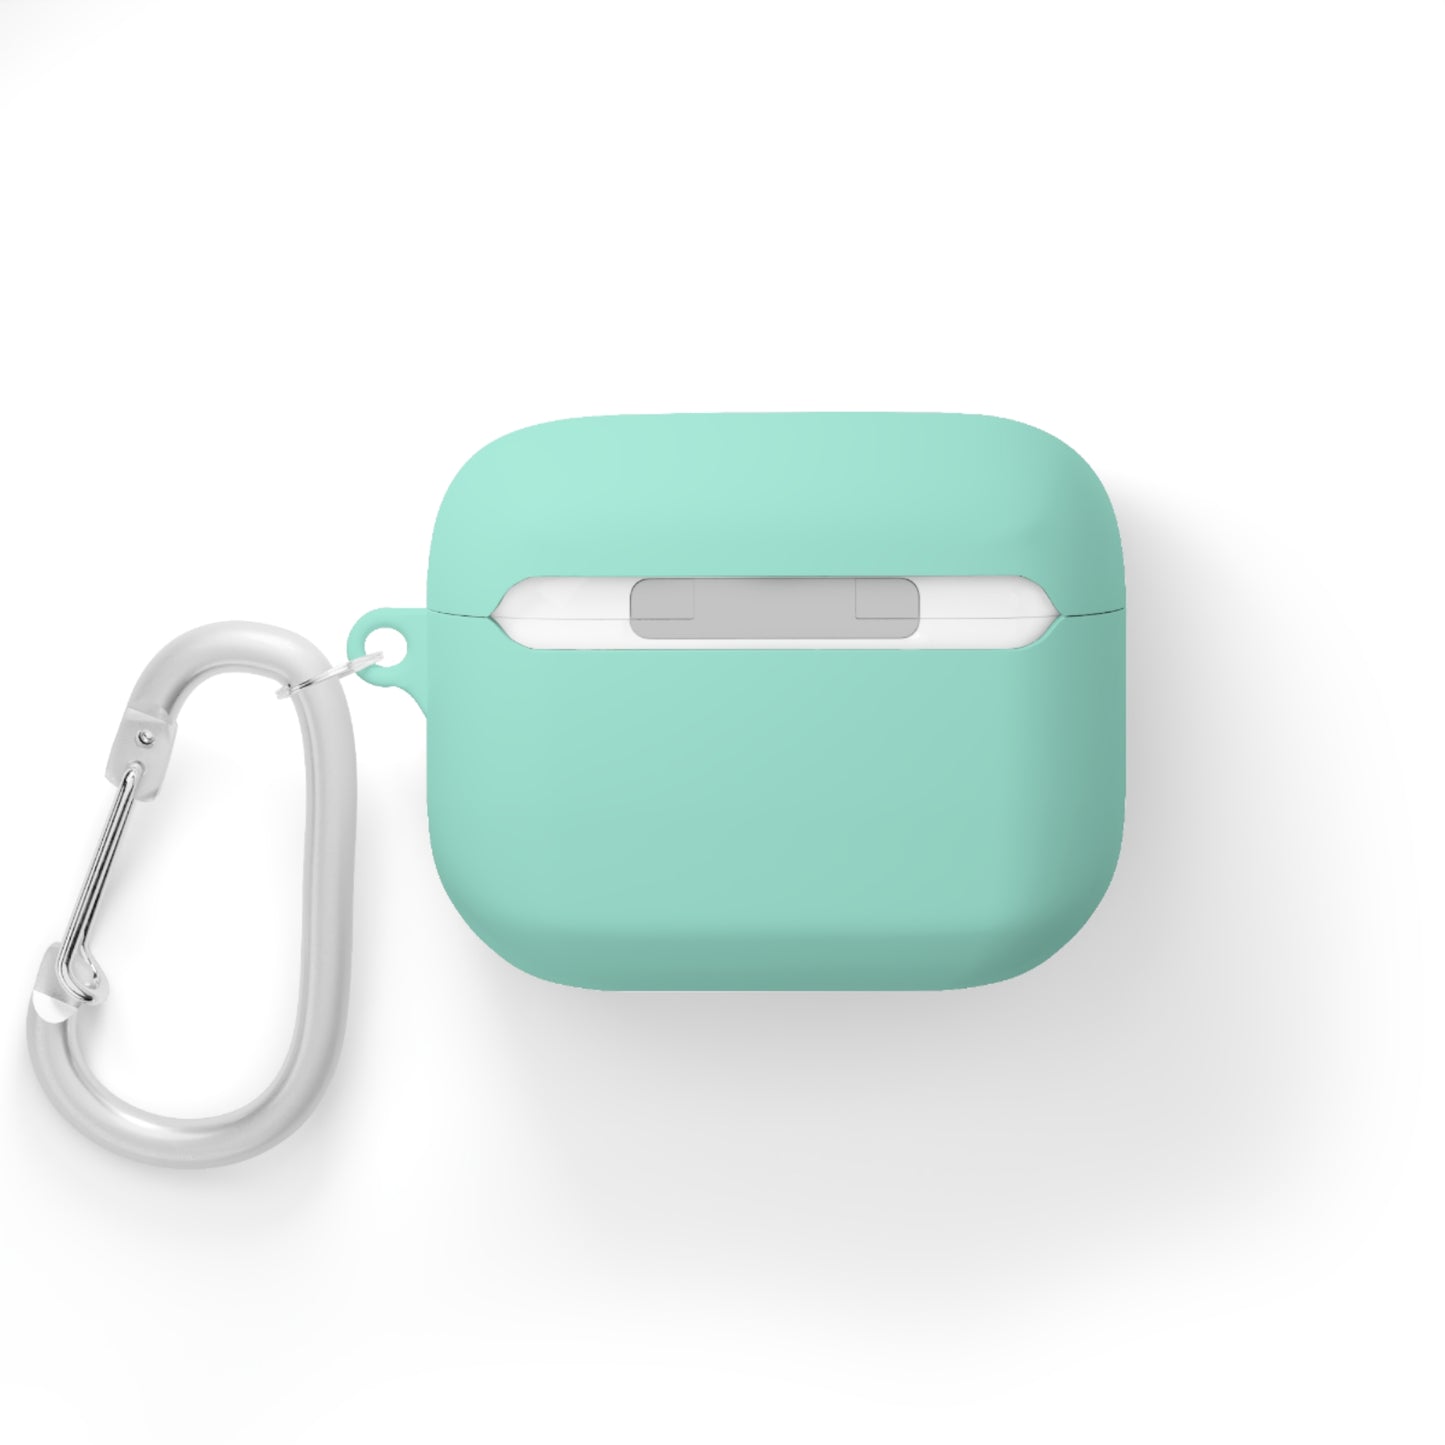 Aloha! AirPods and AirPods Pro Case Cover